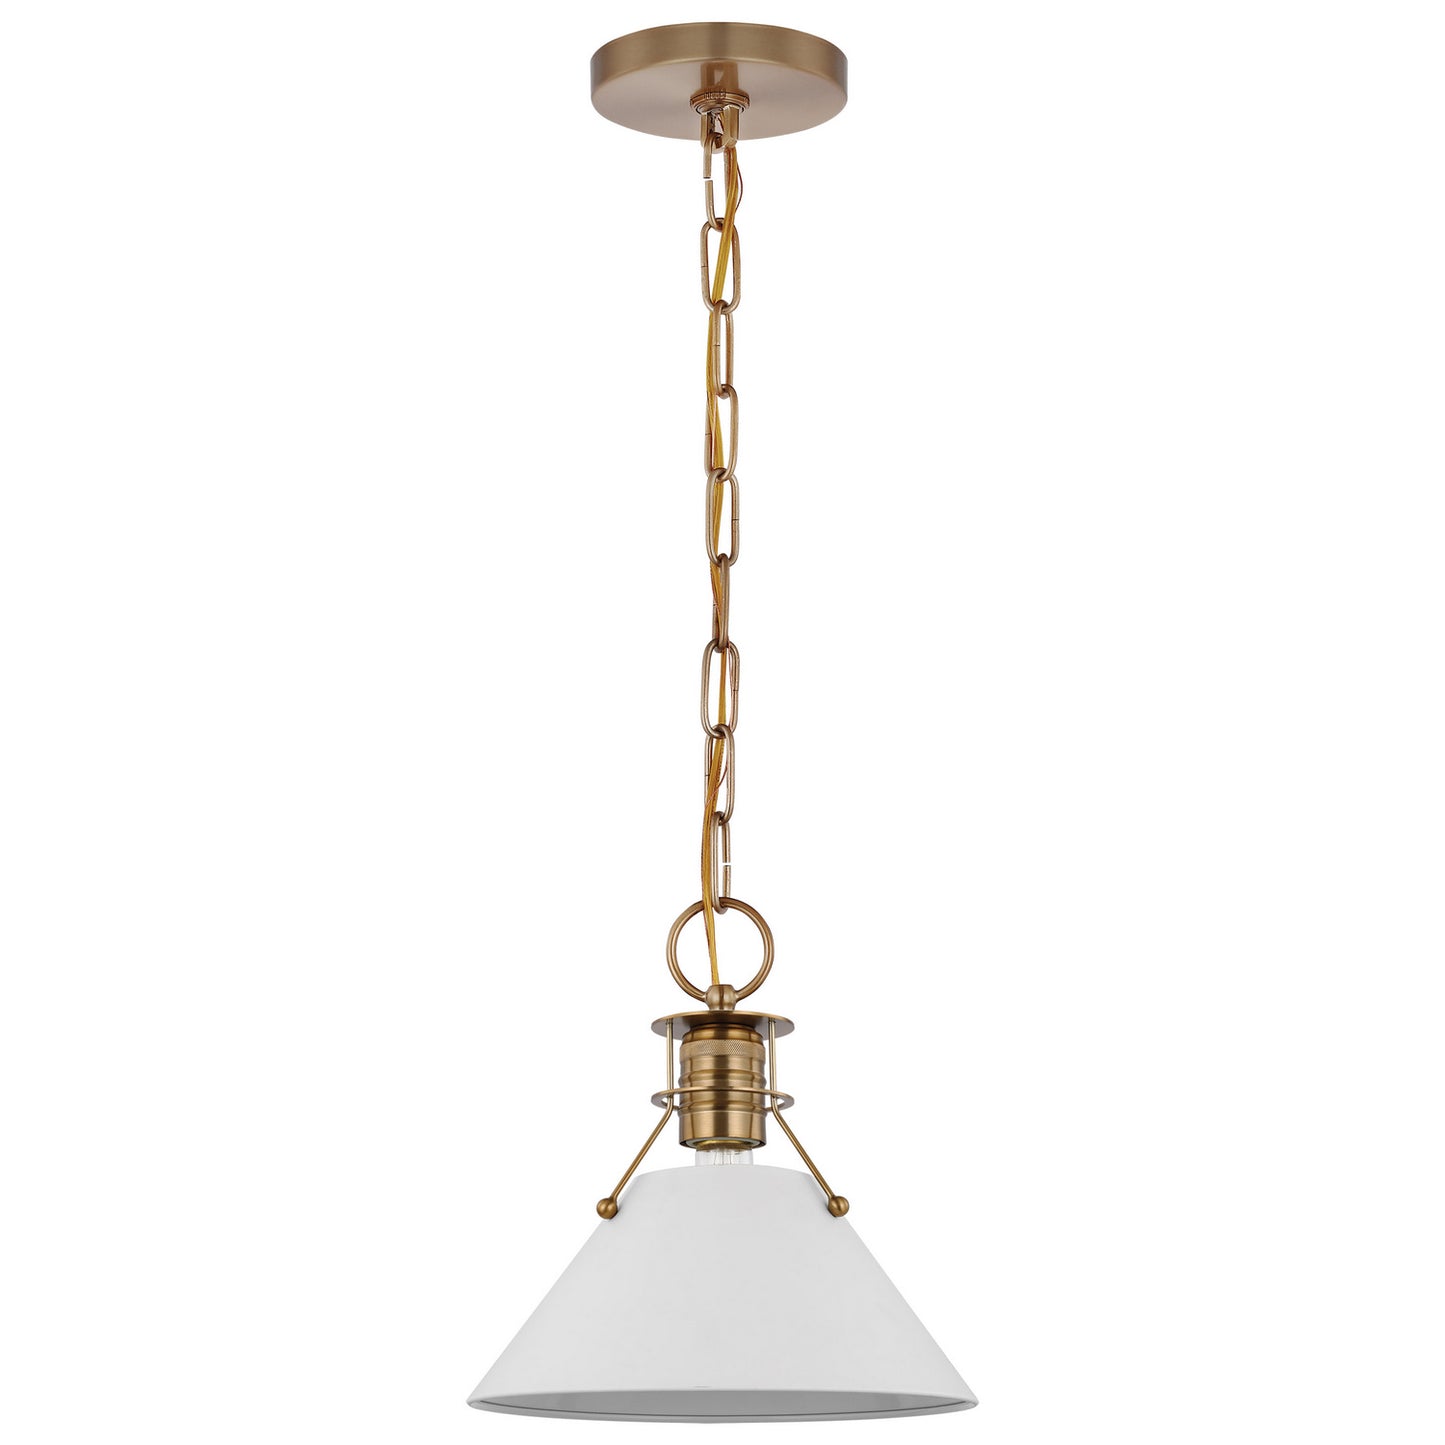 Outpost One Light Pendant by Nuvo Lighting in Matte White / Burnished Brass Finish (60-7522)